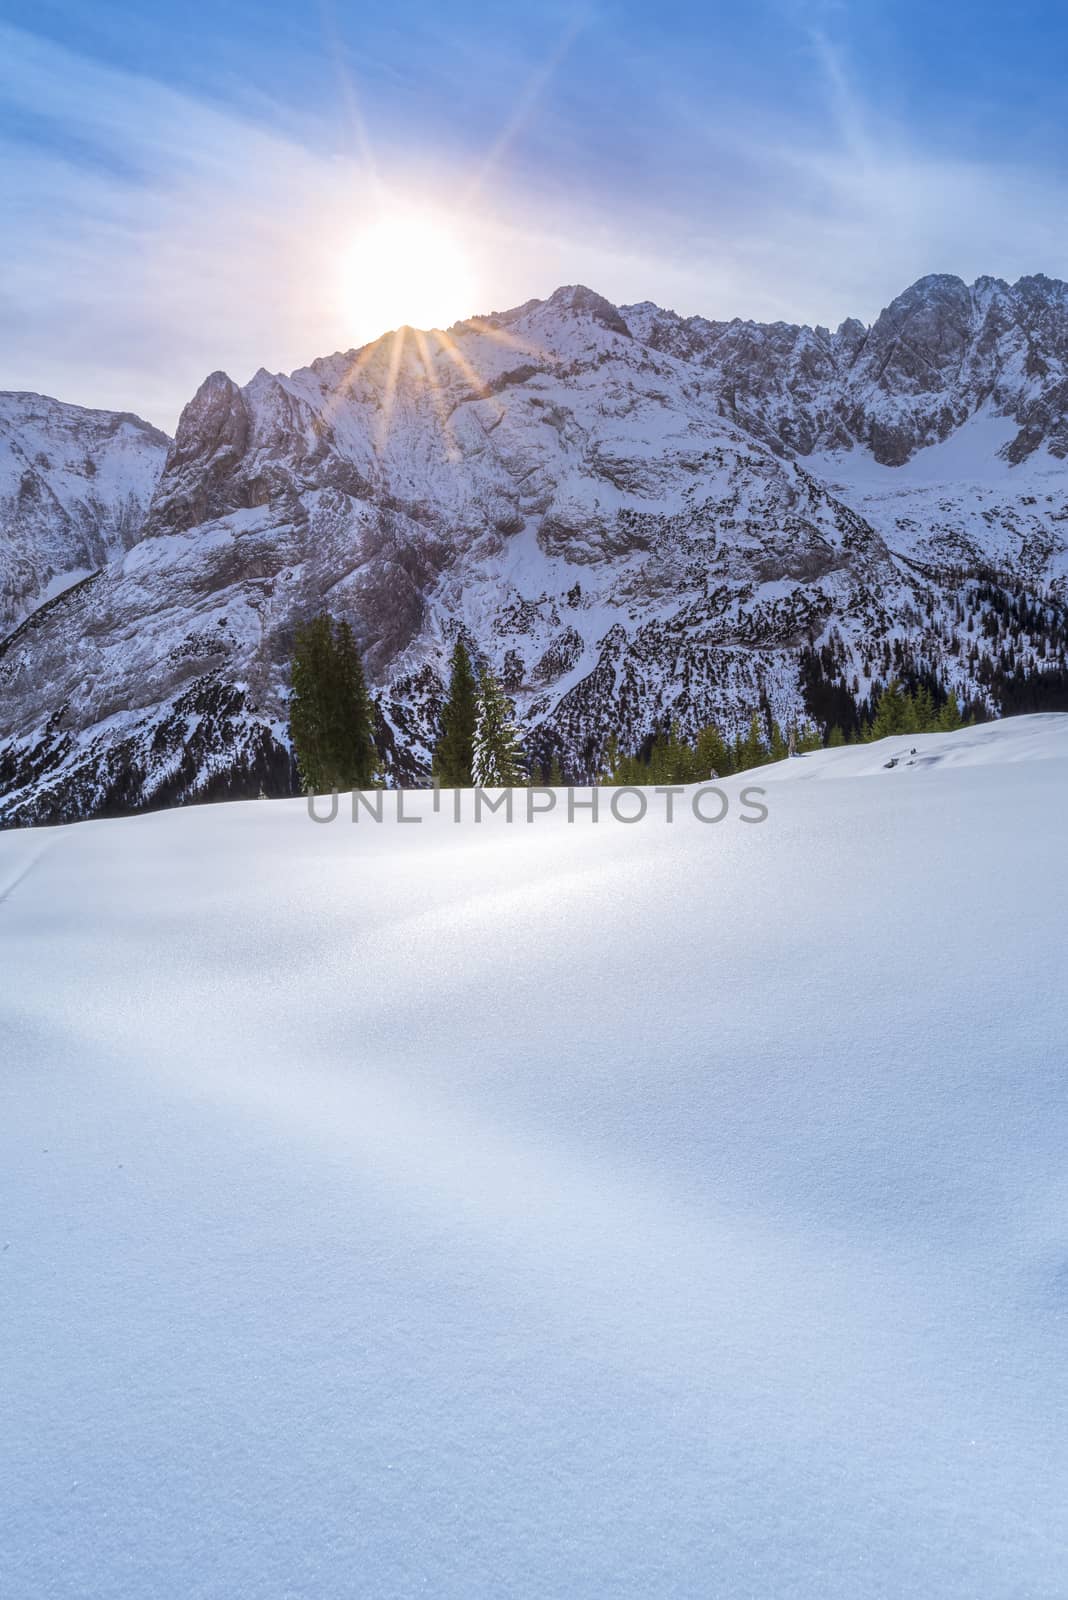 A lovely winter day in the Austrian Alps mountains from the Ehrwald municipality, with the rocky peaks and snowy pastures warmed up by a bright and colorful sun.